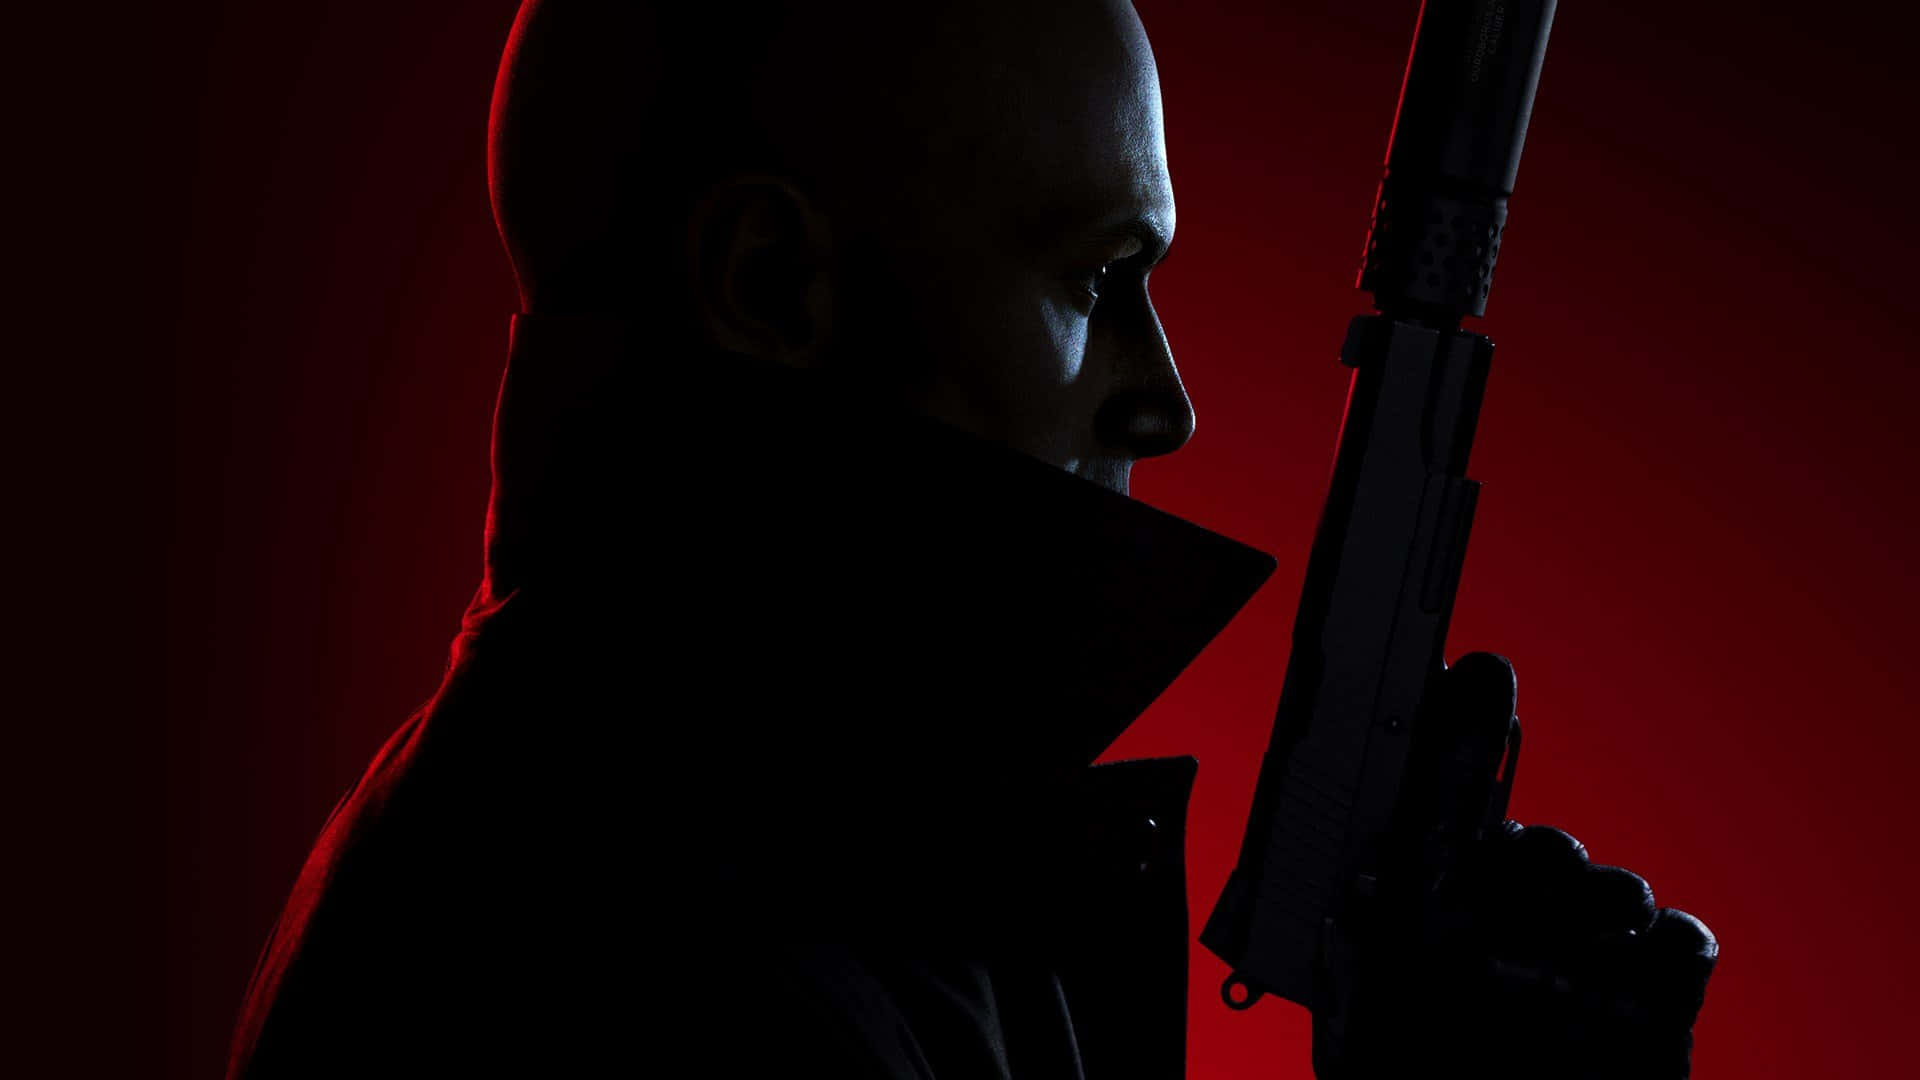 "Enter a world of assassination with Hitman 2"